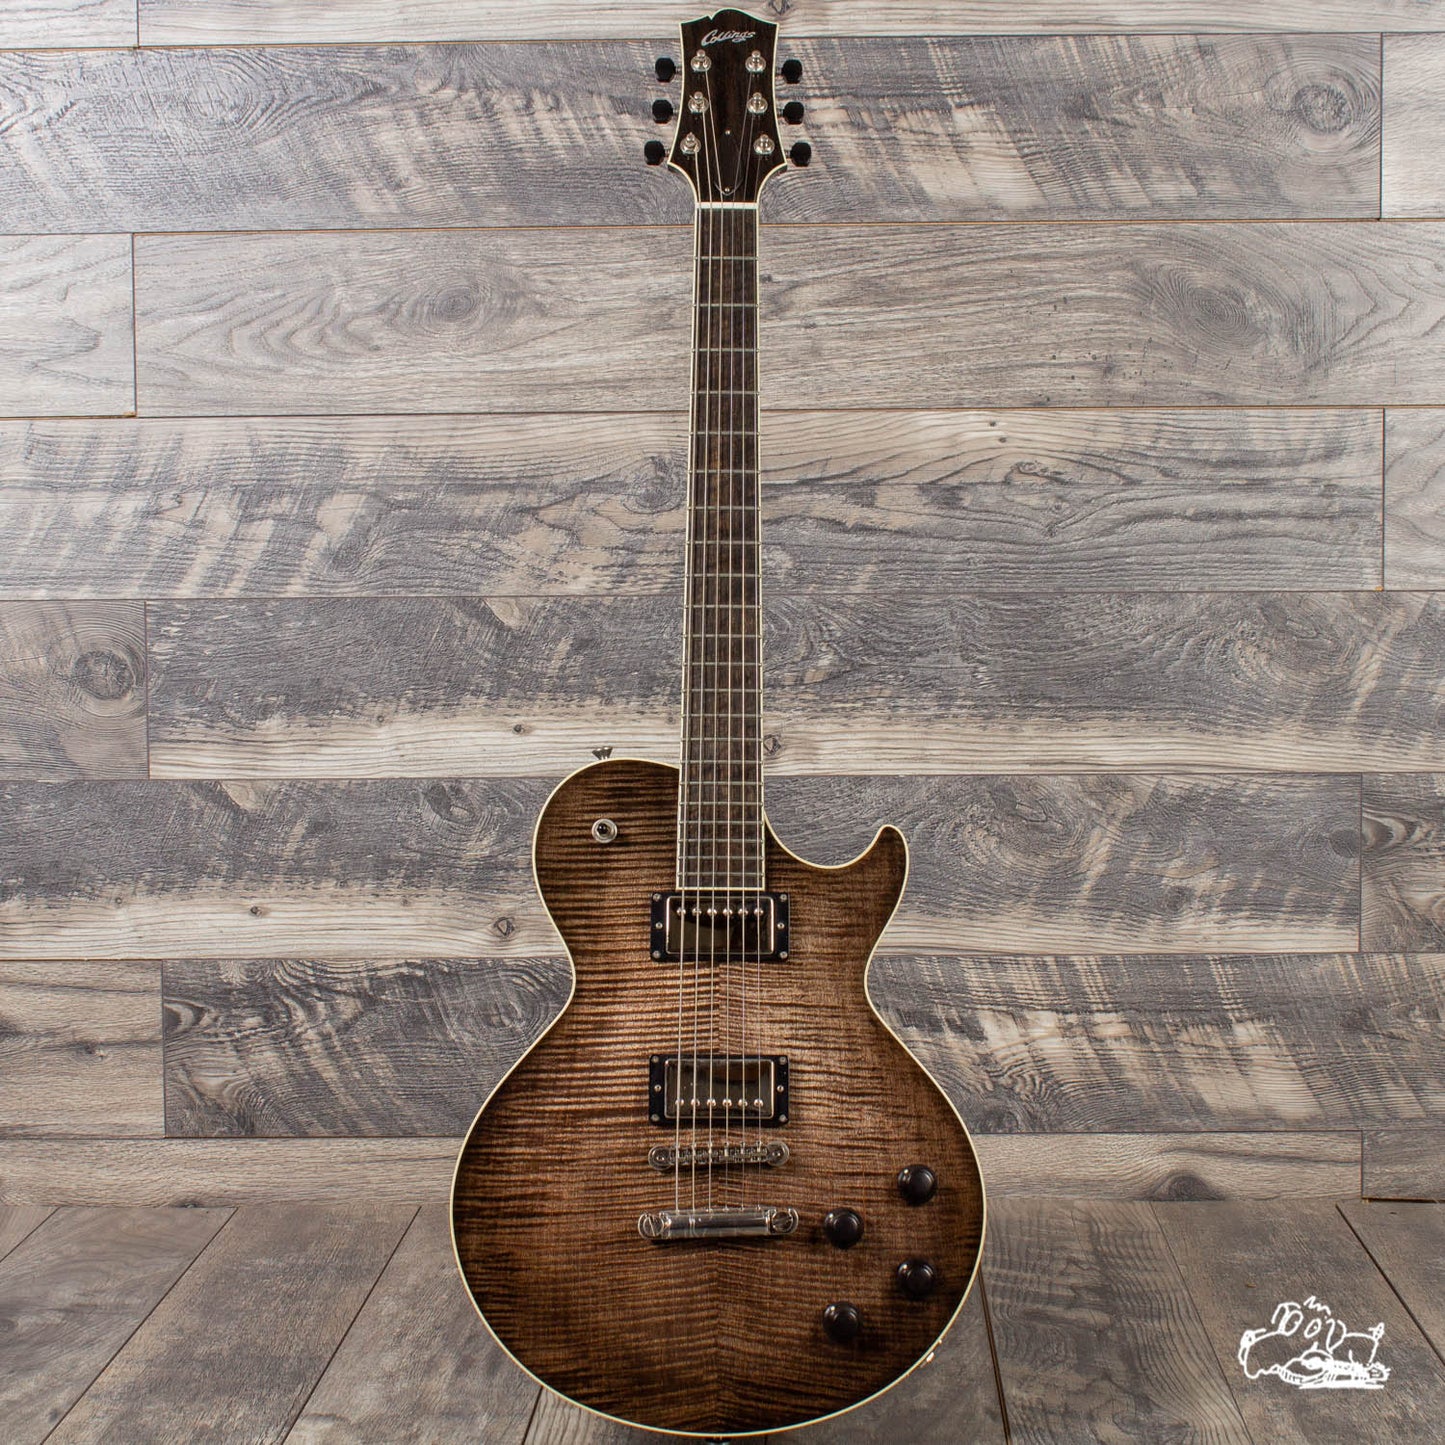 2016 Collings City Limits Deluxe - Charcoal Burst